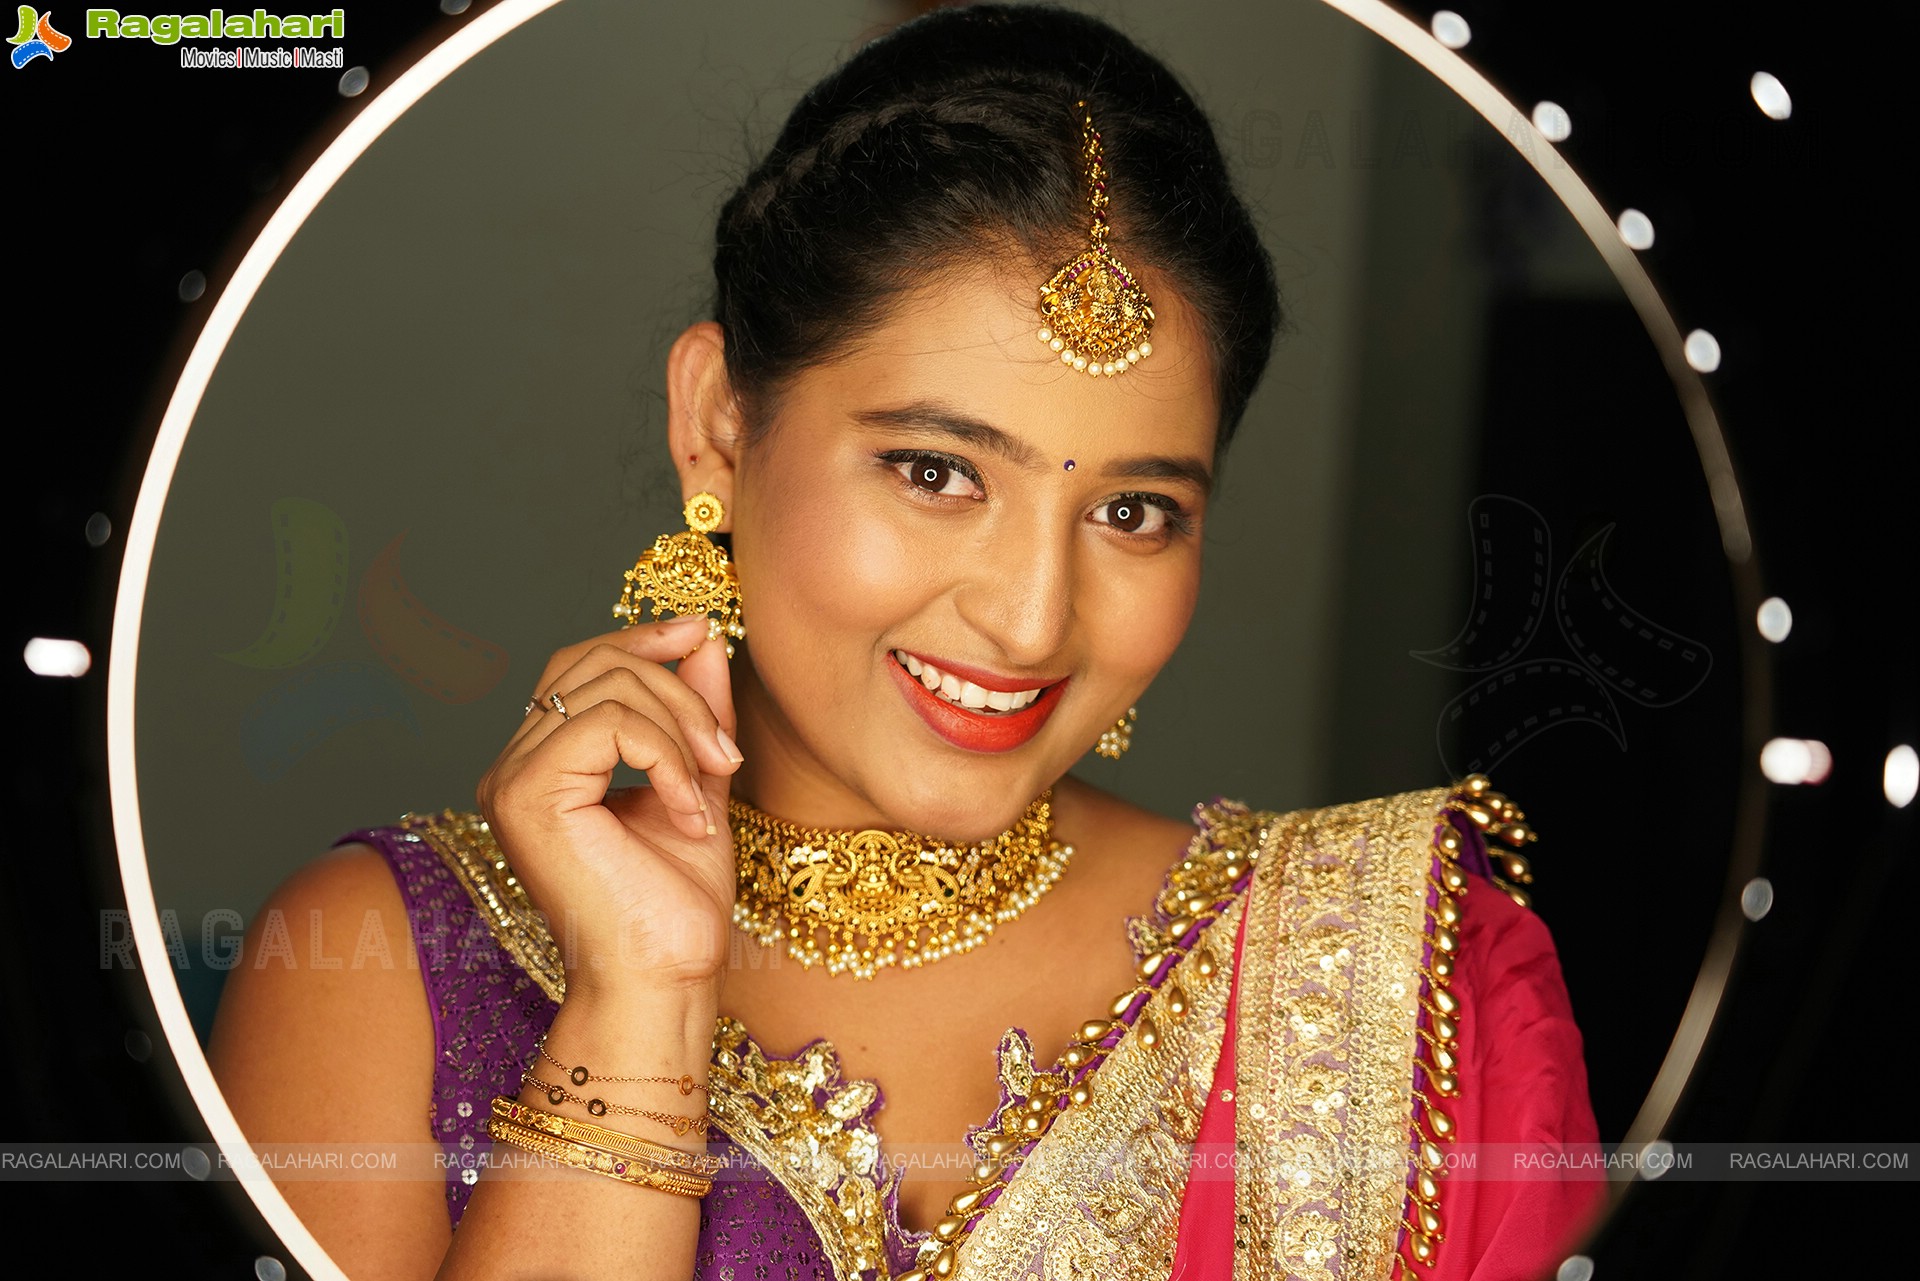 Teja Reddy Stunning Look In Traditional Dress, Exclusive Photoshoot